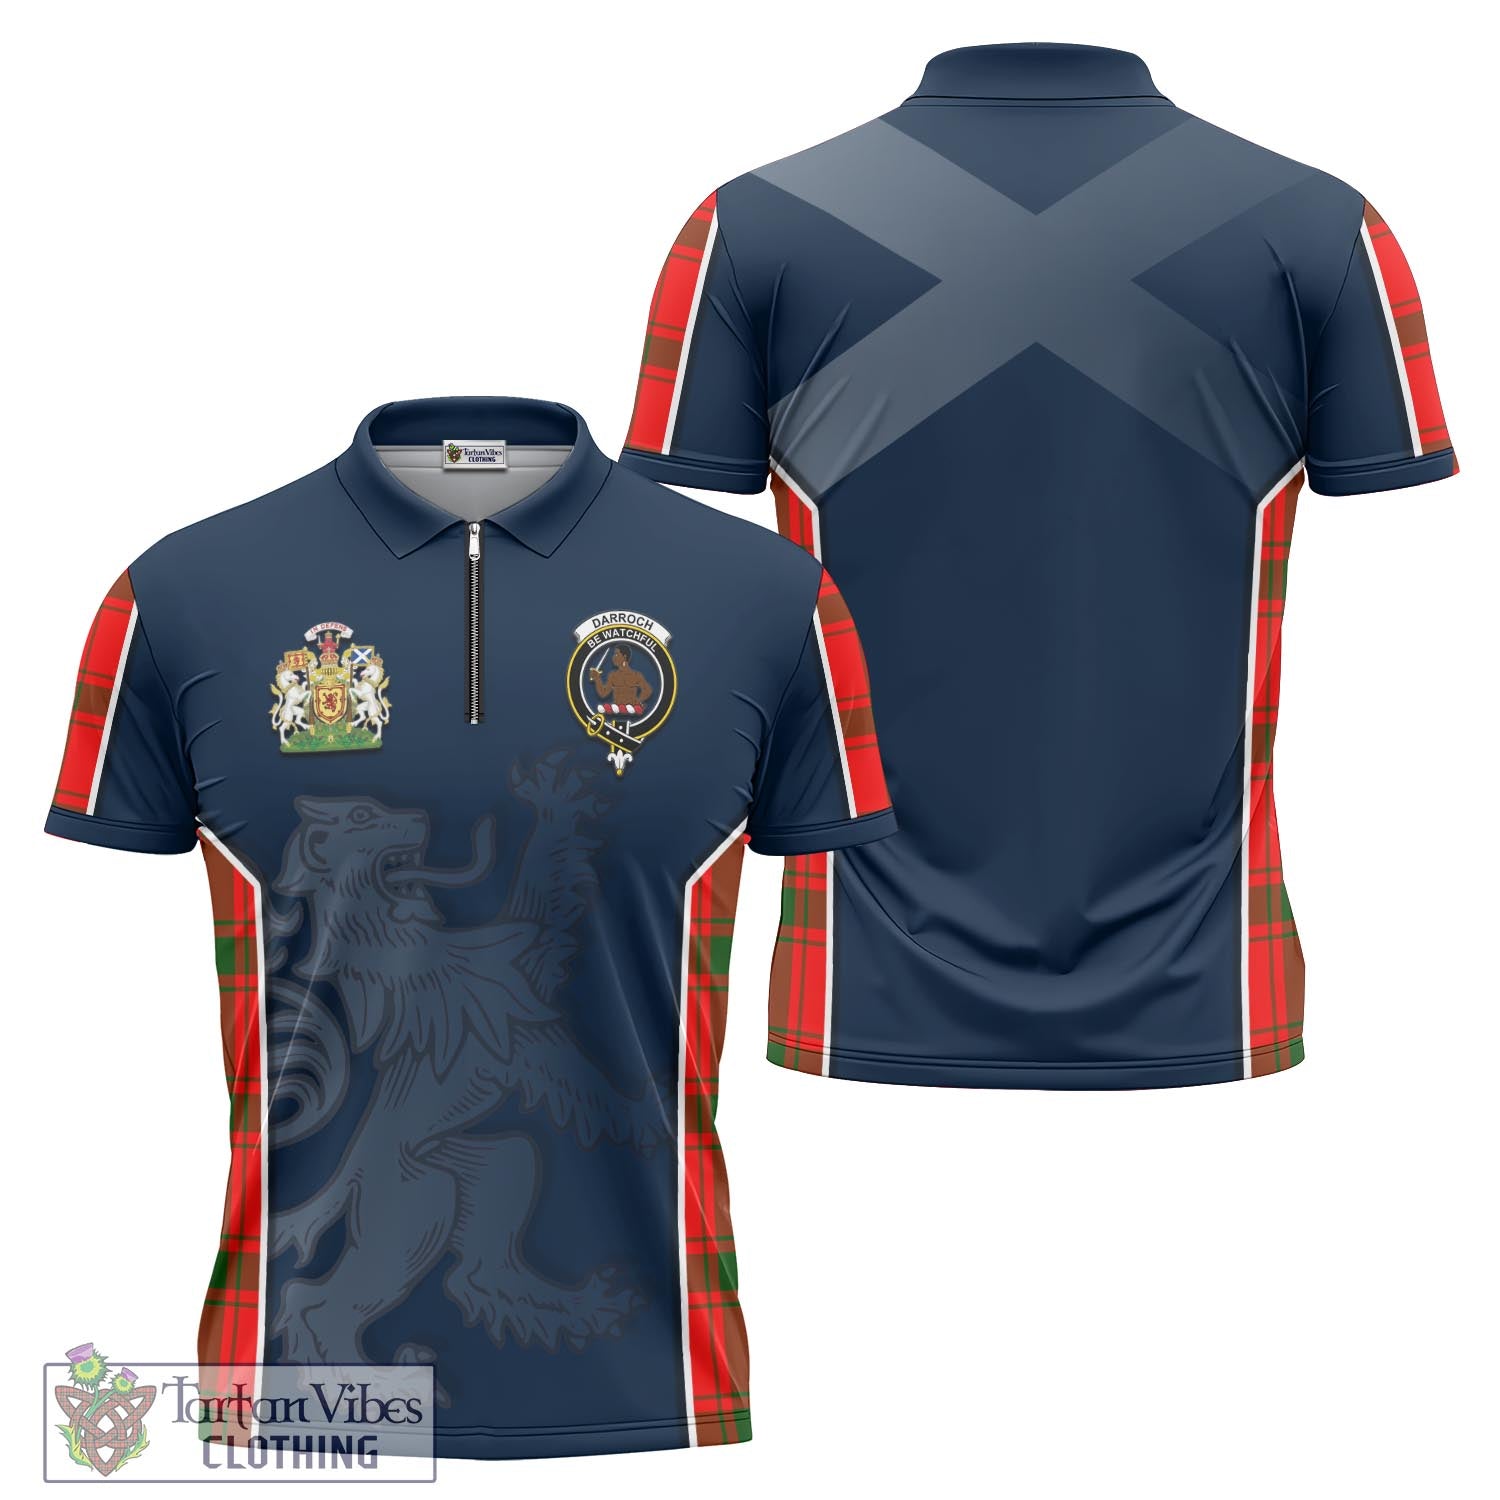 Tartan Vibes Clothing Darroch Tartan Zipper Polo Shirt with Family Crest and Lion Rampant Vibes Sport Style